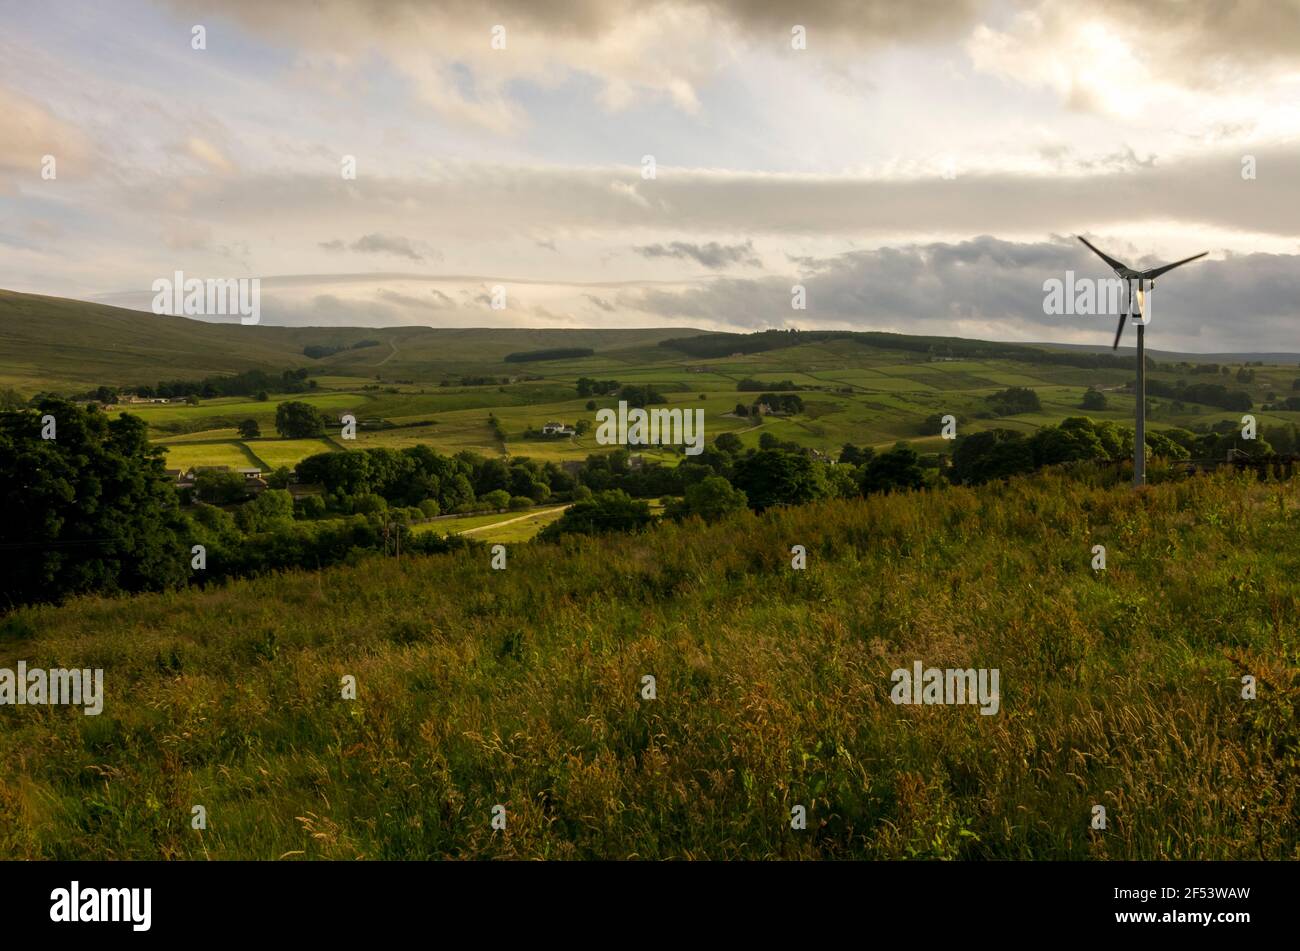 Hills, fields and a wind turbine in Weardale, the North Pennines, County Durham, UK Stock Photo